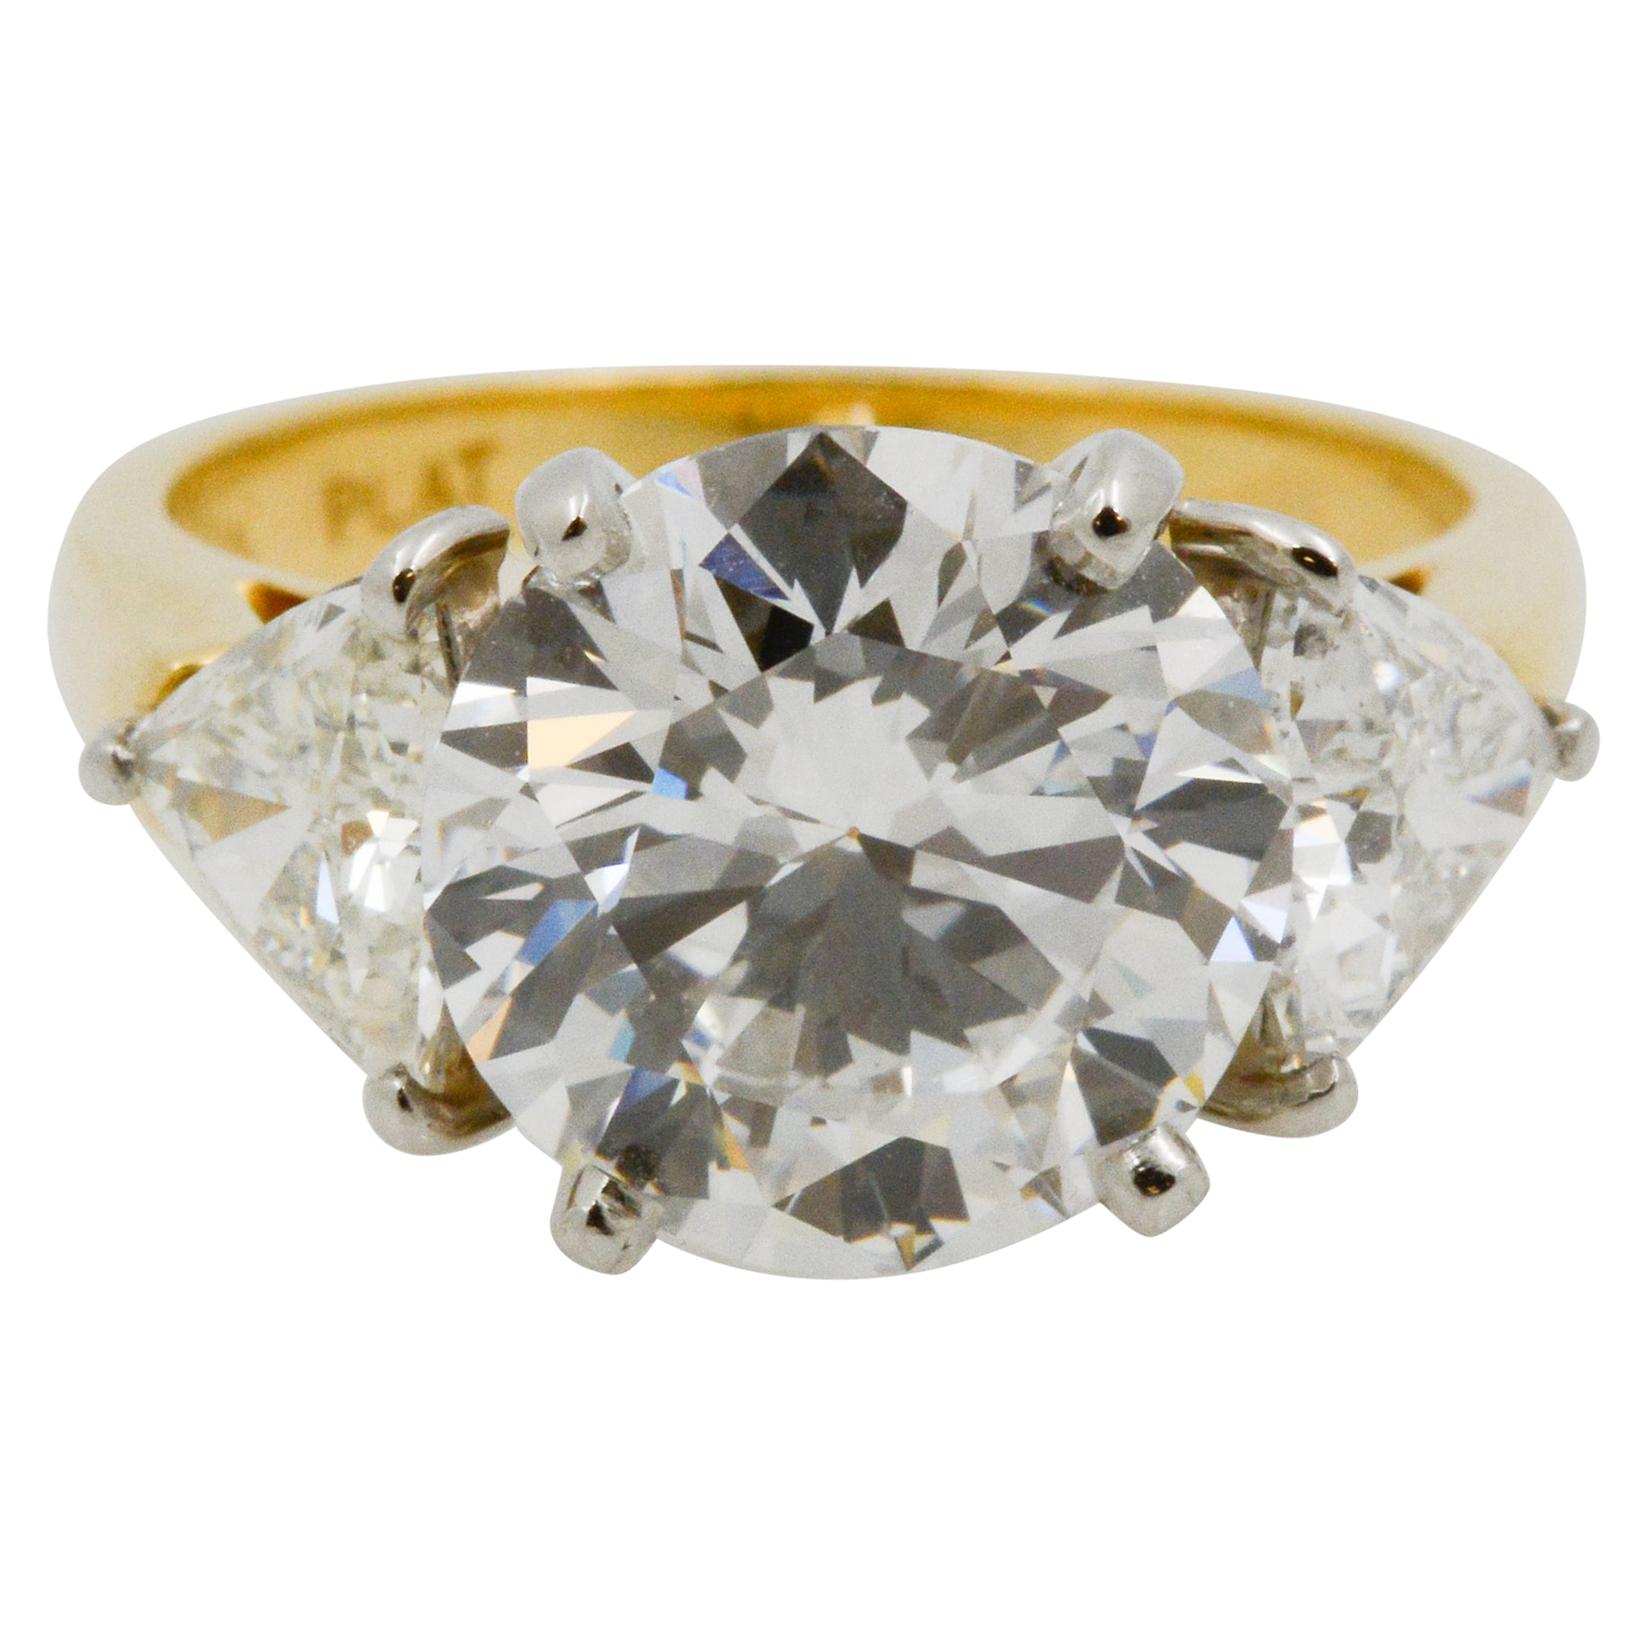 Showcasing a GIA certified 5.02 ct round brilliant cut diamond with D color and VVS2 clarity, this ring is paired with two trillion side diamonds, weighing a total of 1.55 carats with D-E color and SI1 clarity. The diamonds are on an 18k yellow gold